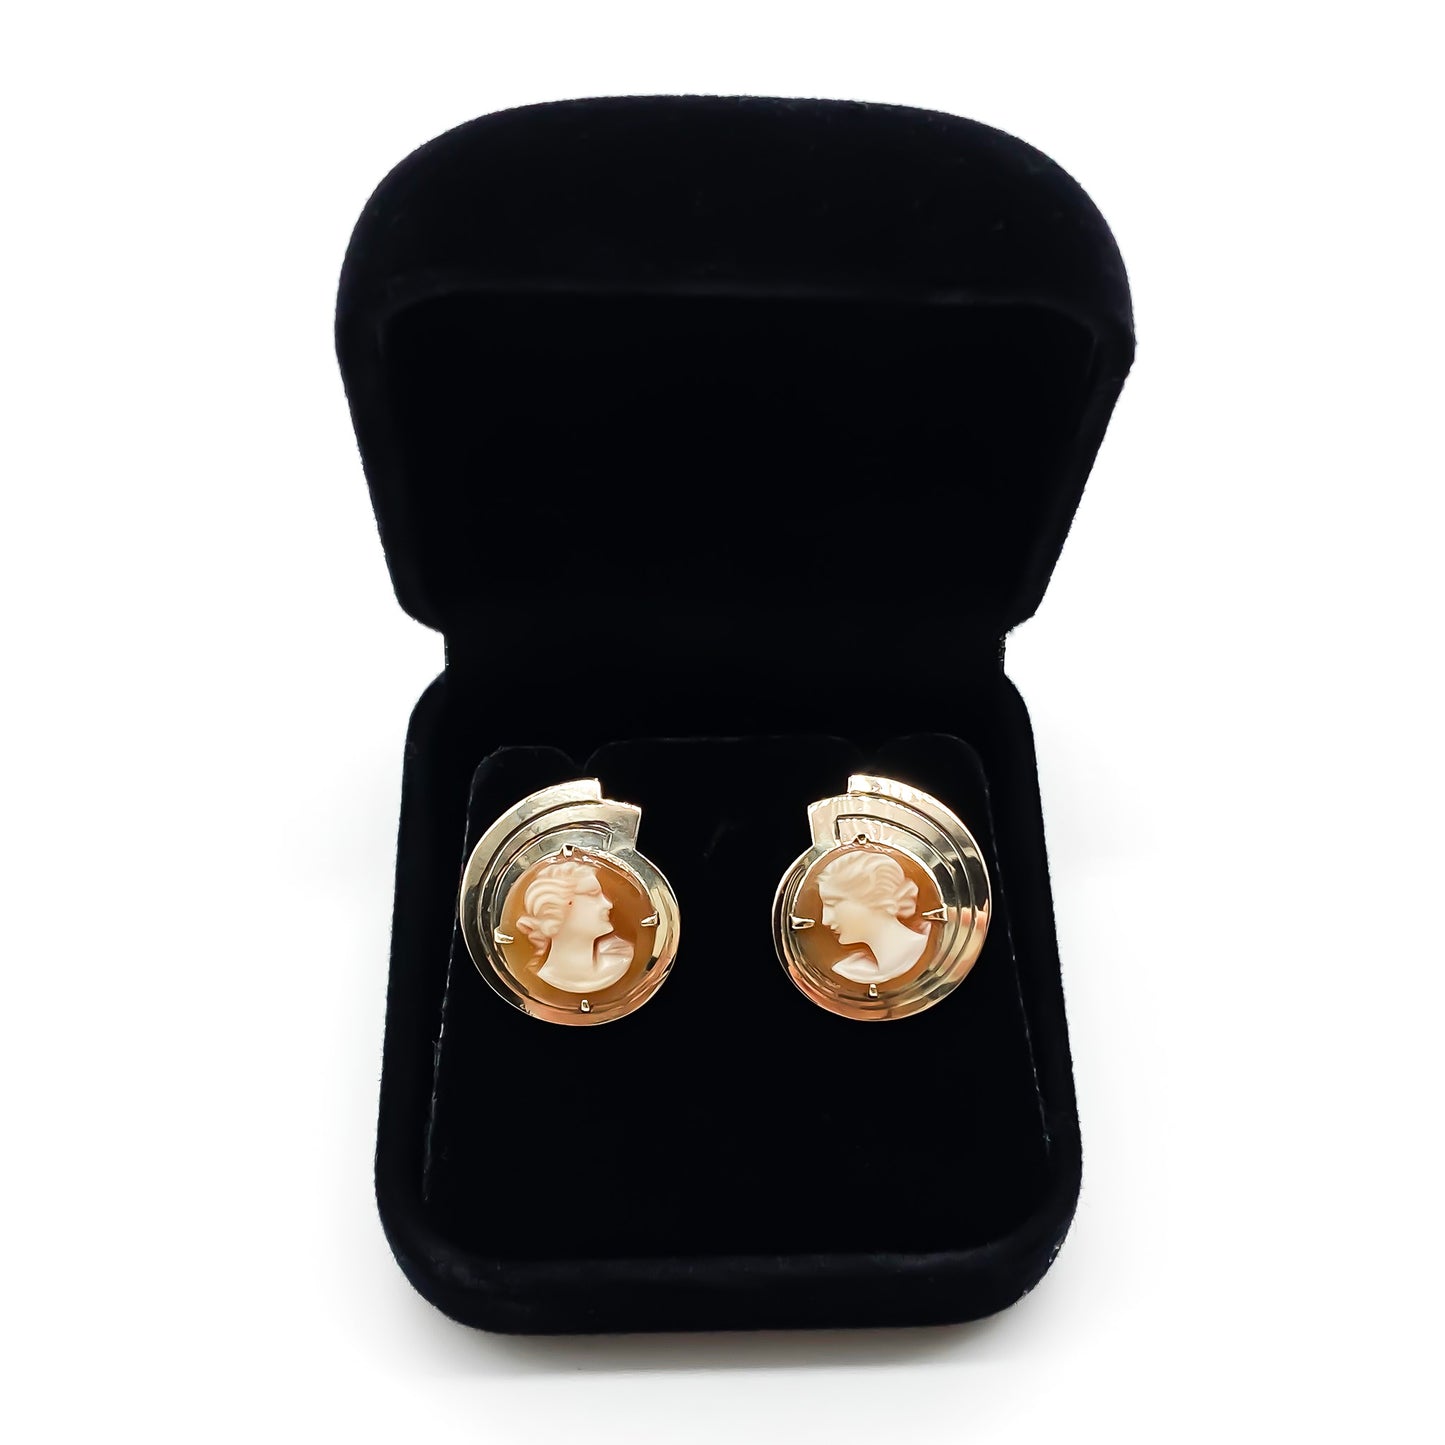 Stylish vintage 9ct rose gold stud earrings set with two beautifully carved cameos.